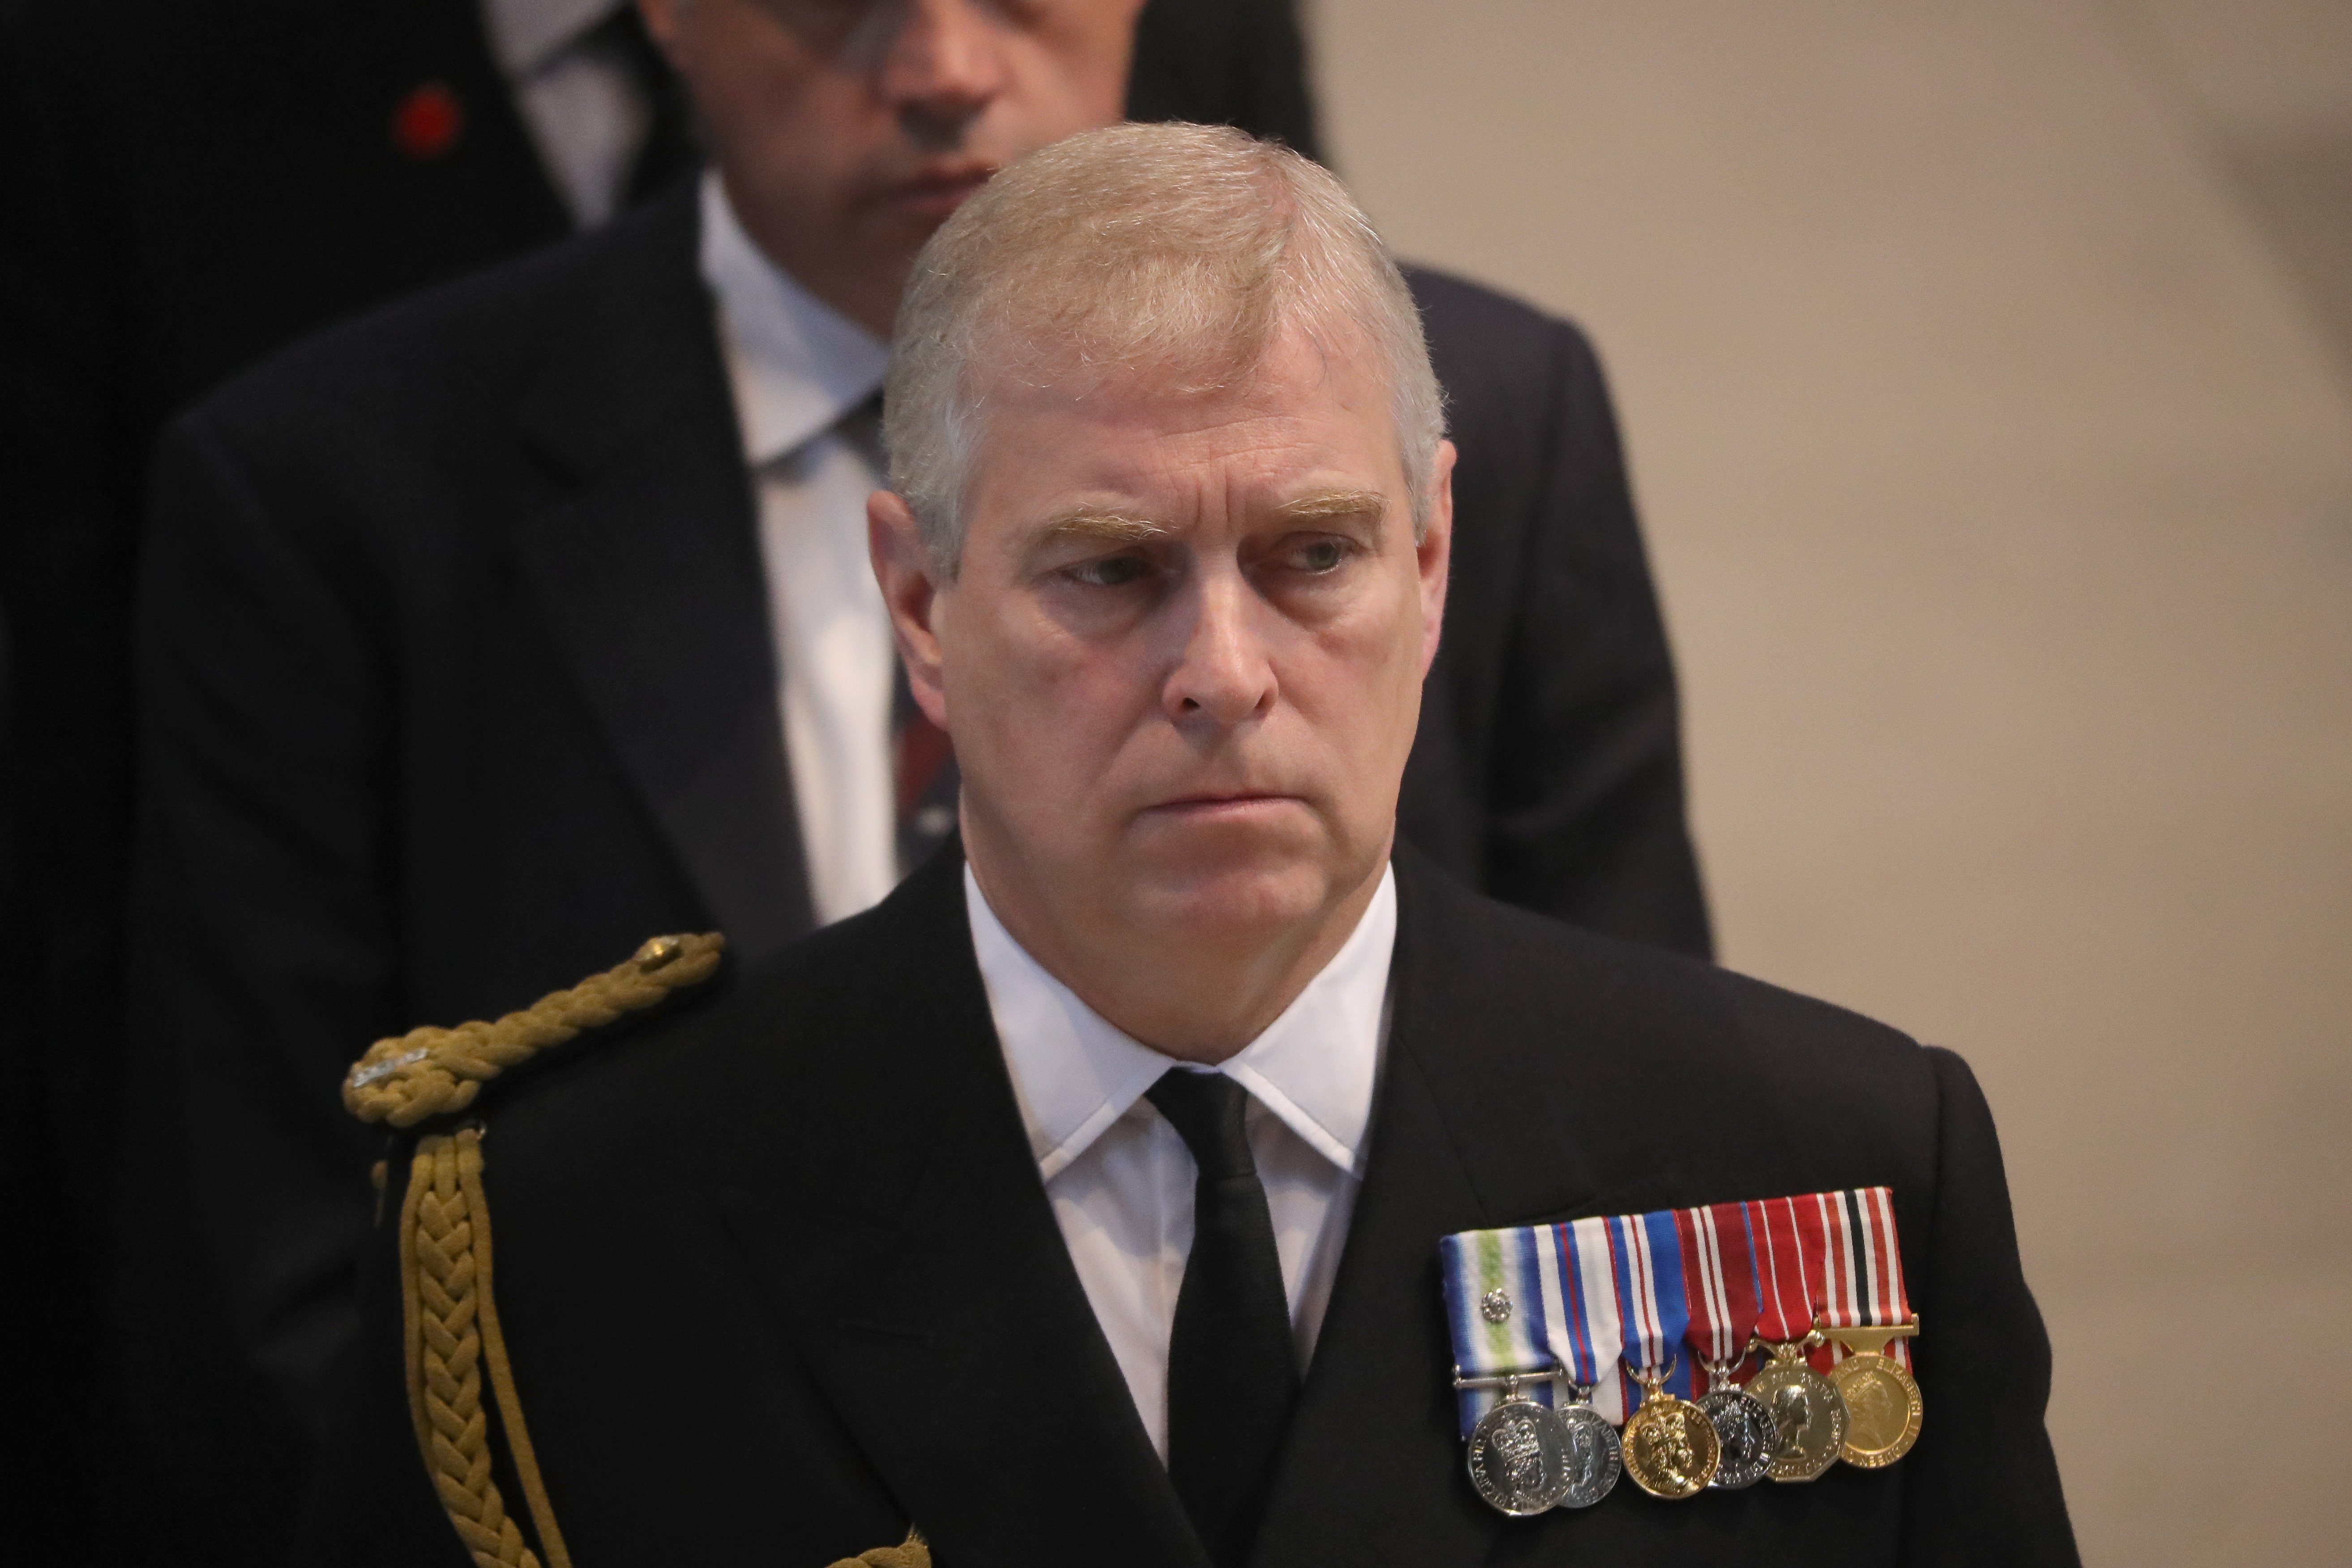 Prince Andrew at a commemoration service at Manchester Cathedral on July 1, 2016, in Manchester, England | Source: Getty Images